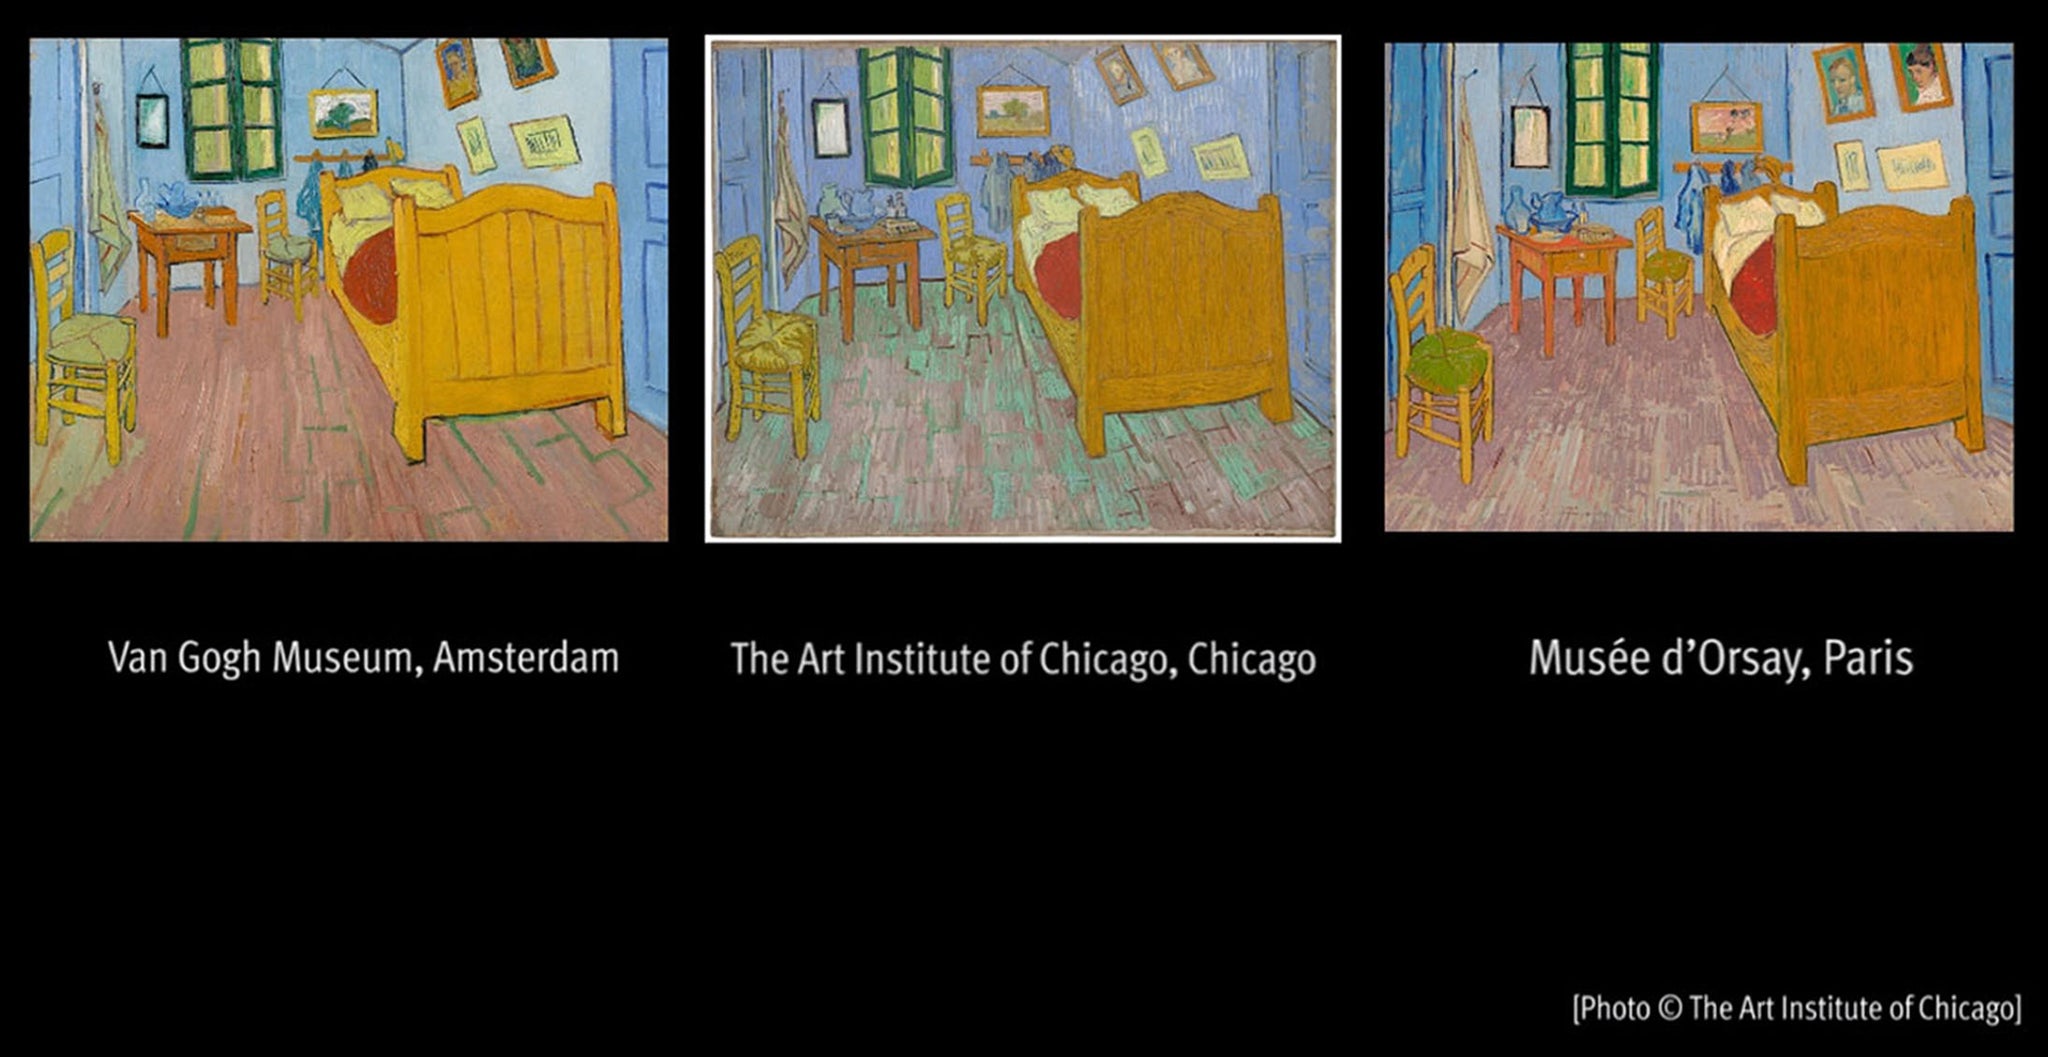 The three versions of "The Bedroom at Arles" painted by Vincent van Gogh